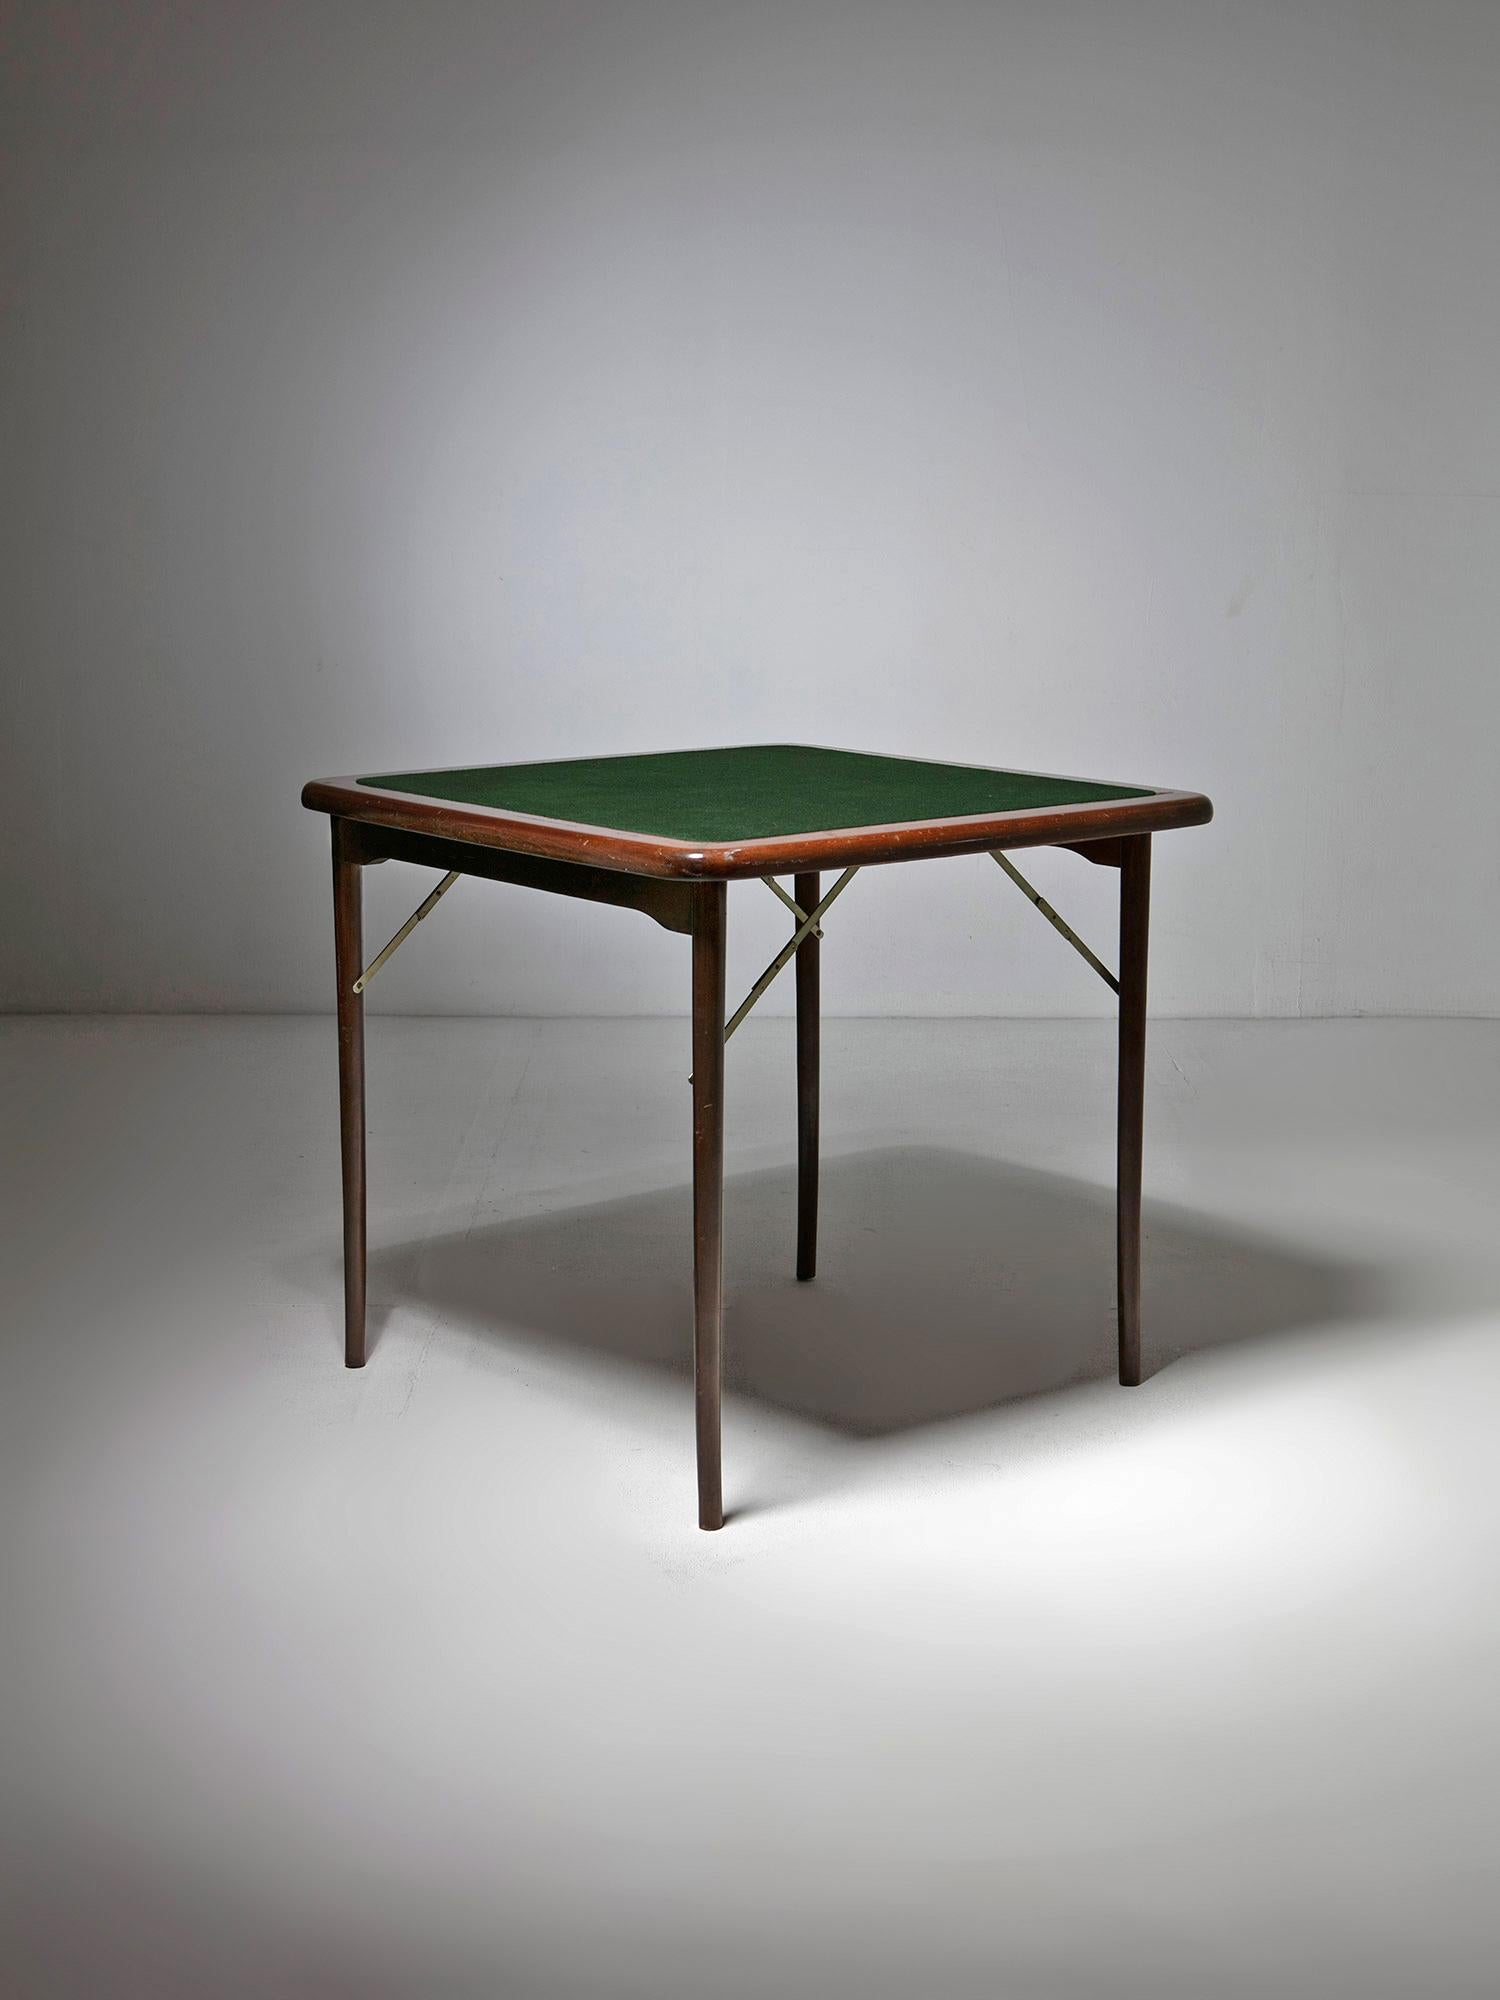 Folding table with round edges and green cloth covered top.
Brass details